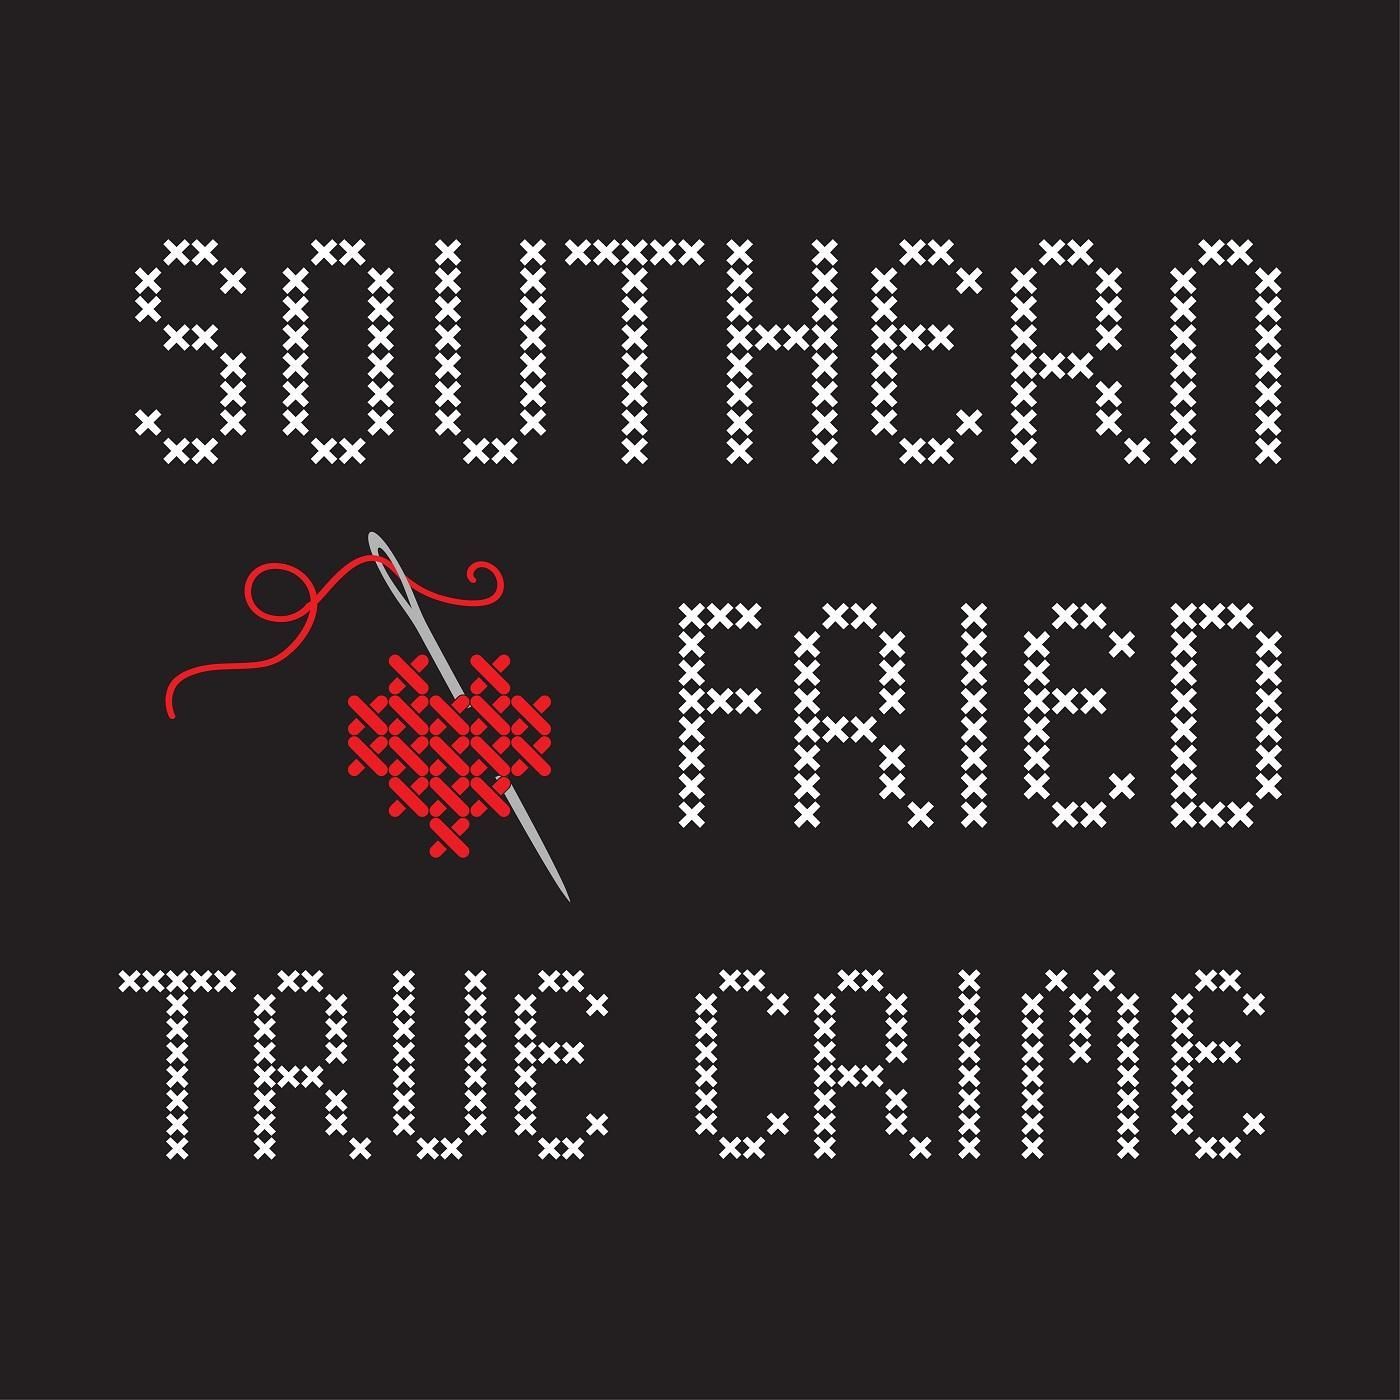 Southern Fried True Crime